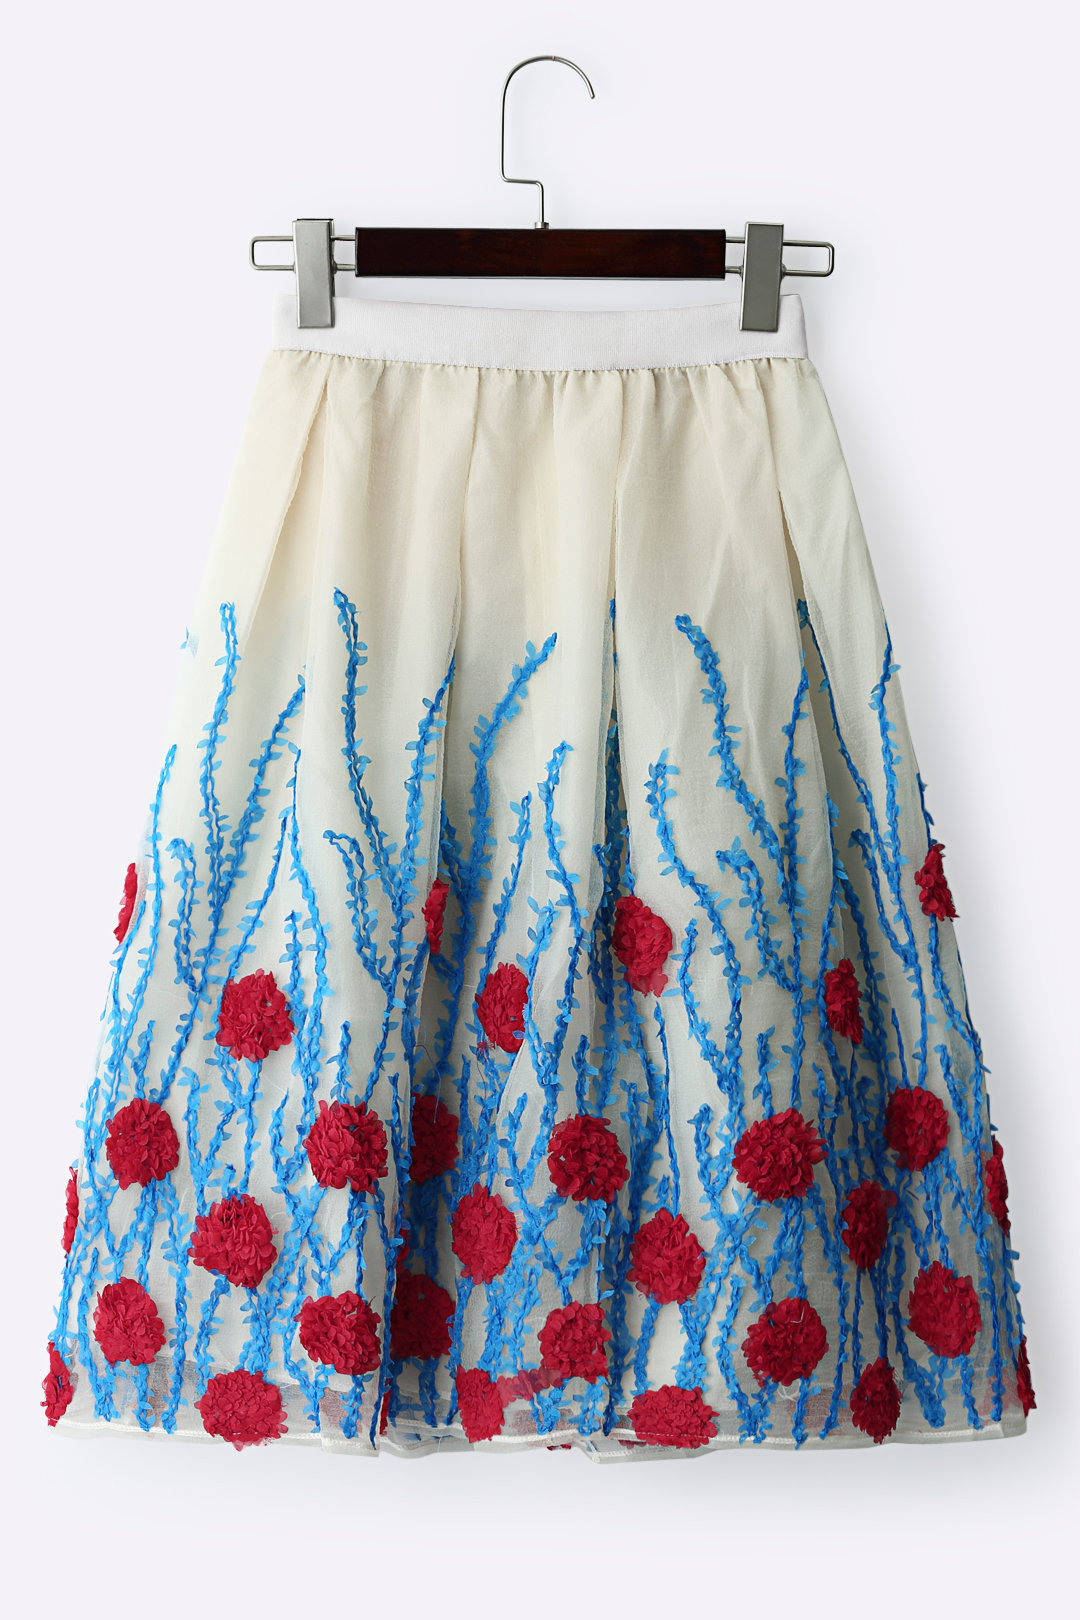 Sheer Red Random Embroidered Floral Midi Skirts